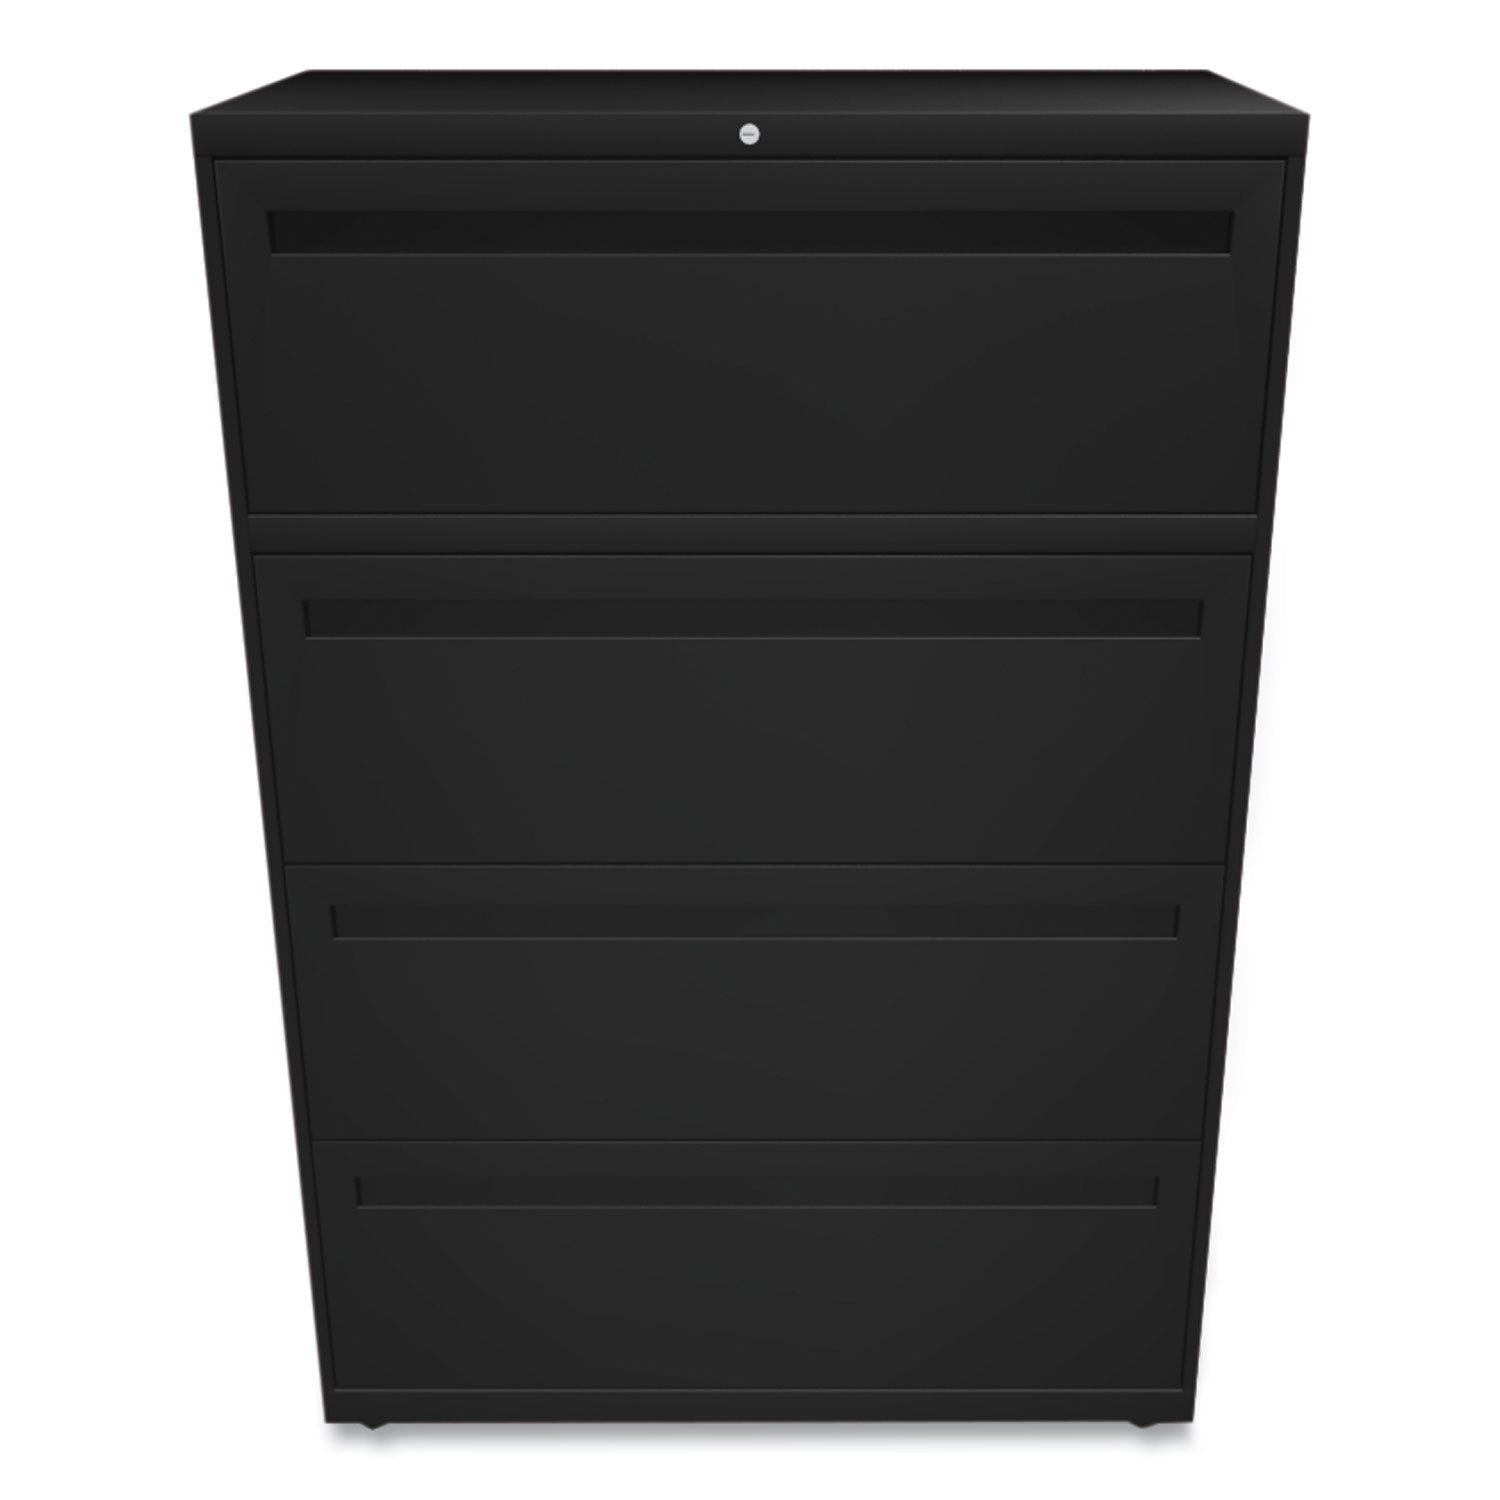 Brigade 700 Series Lateral File, 4 Legal/Letter-Size File Drawers, Black, 36" x 18" x 52.5 - 